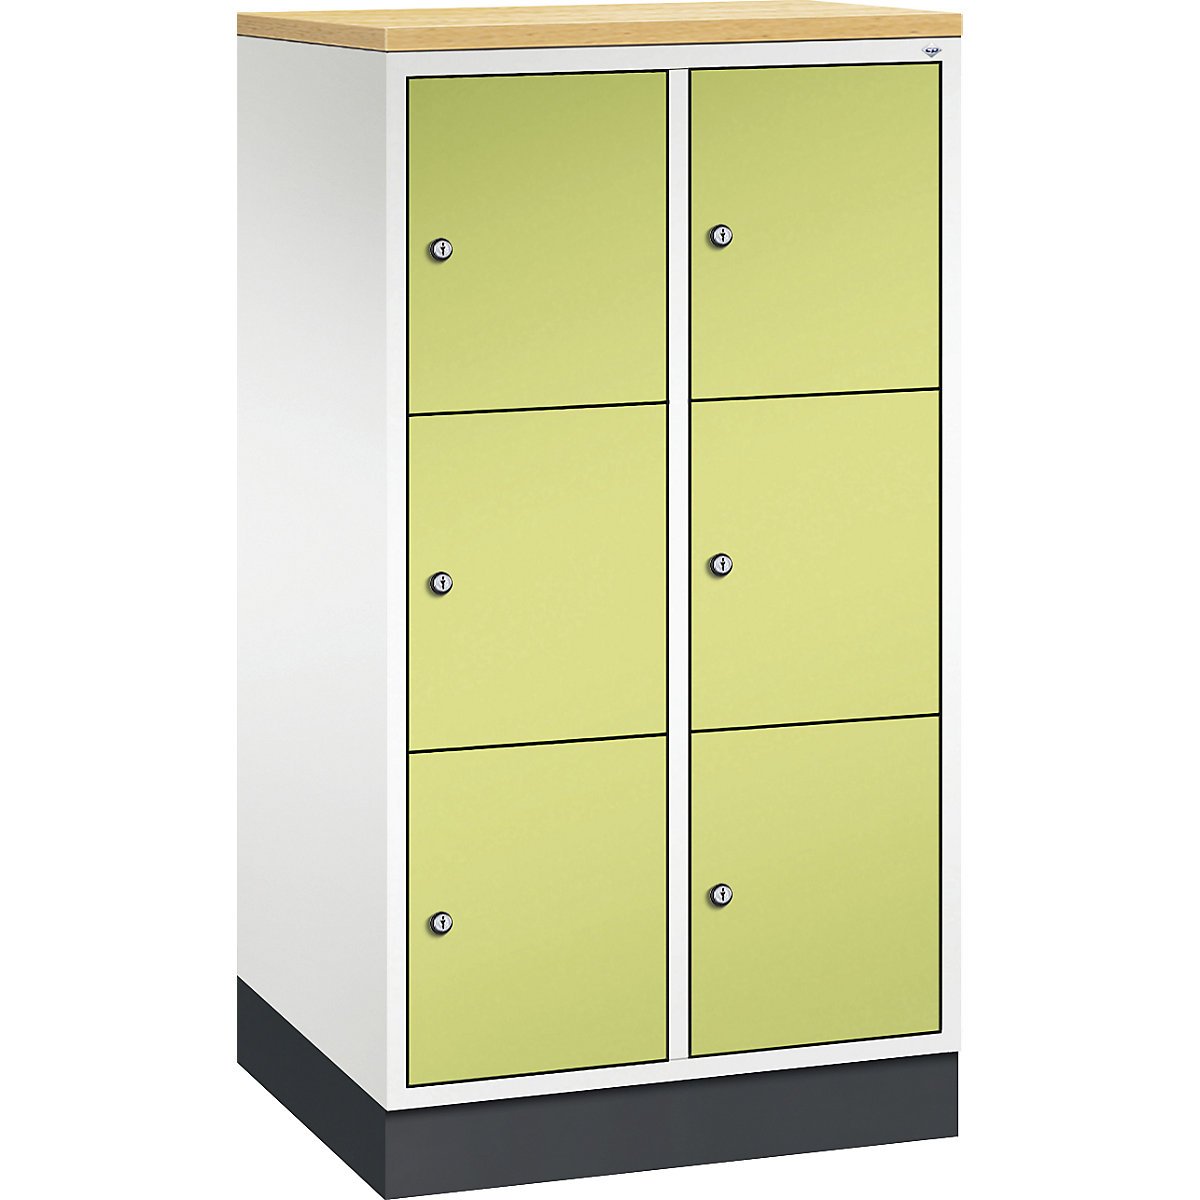 INTRO steel compartment locker, compartment height 345 mm – C+P, WxD 620 x 500 mm, 6 compartments, pure white body, viridian green doors